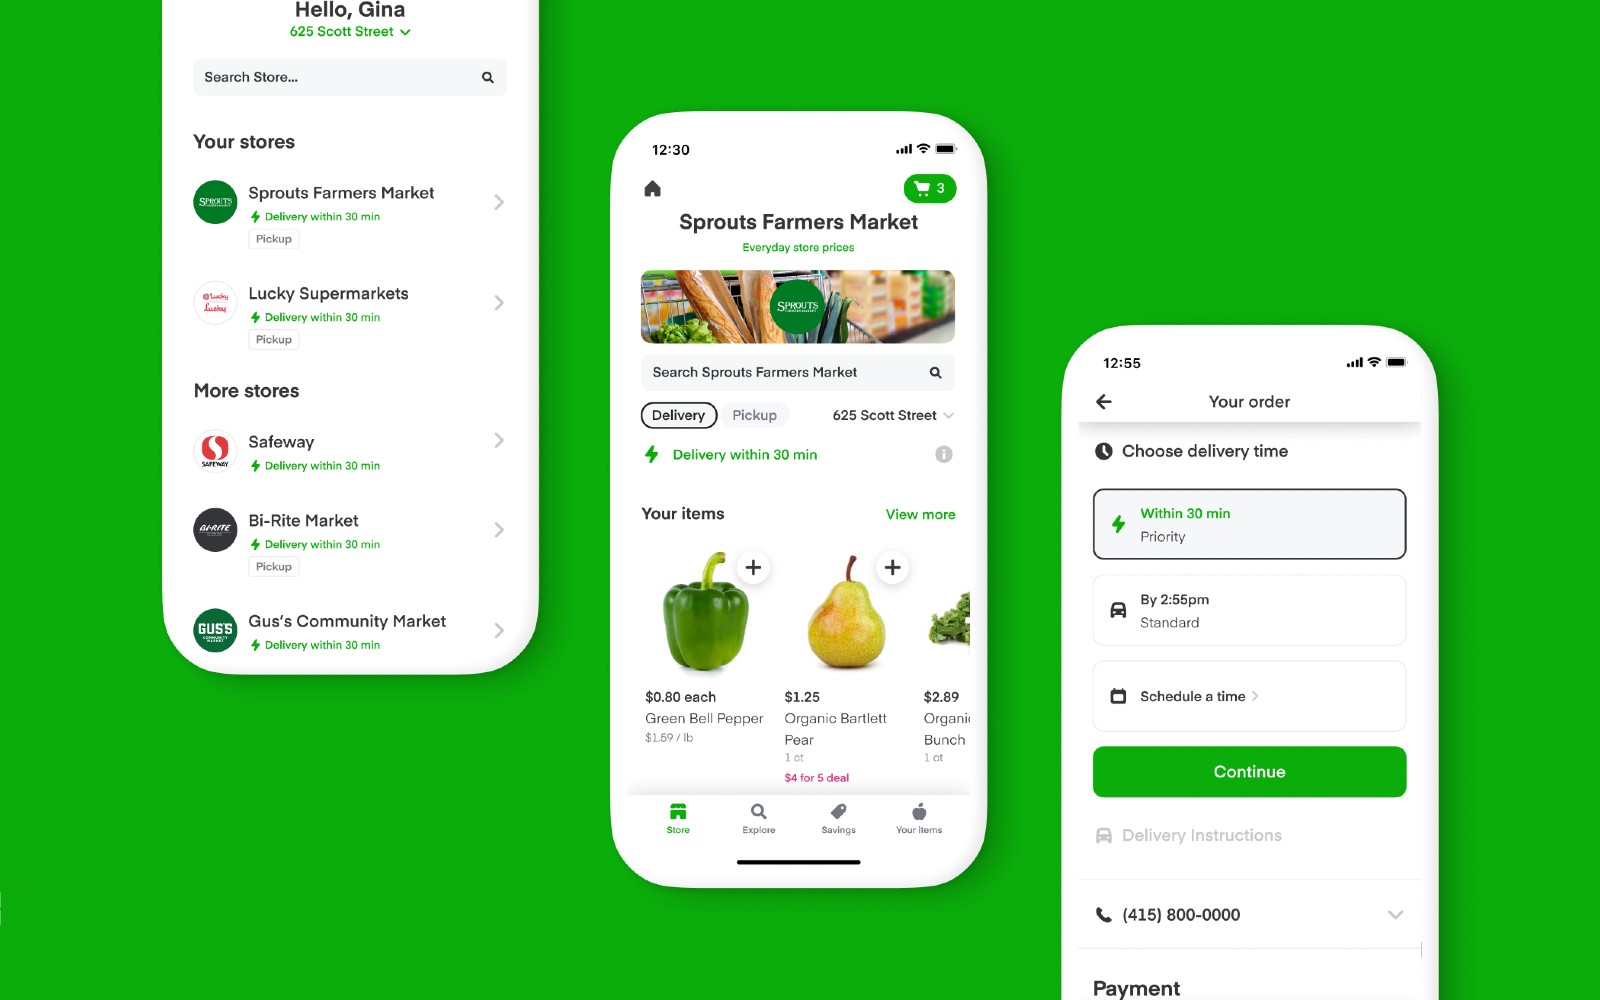 Instacart offers 30-minute deliveries in some US cities